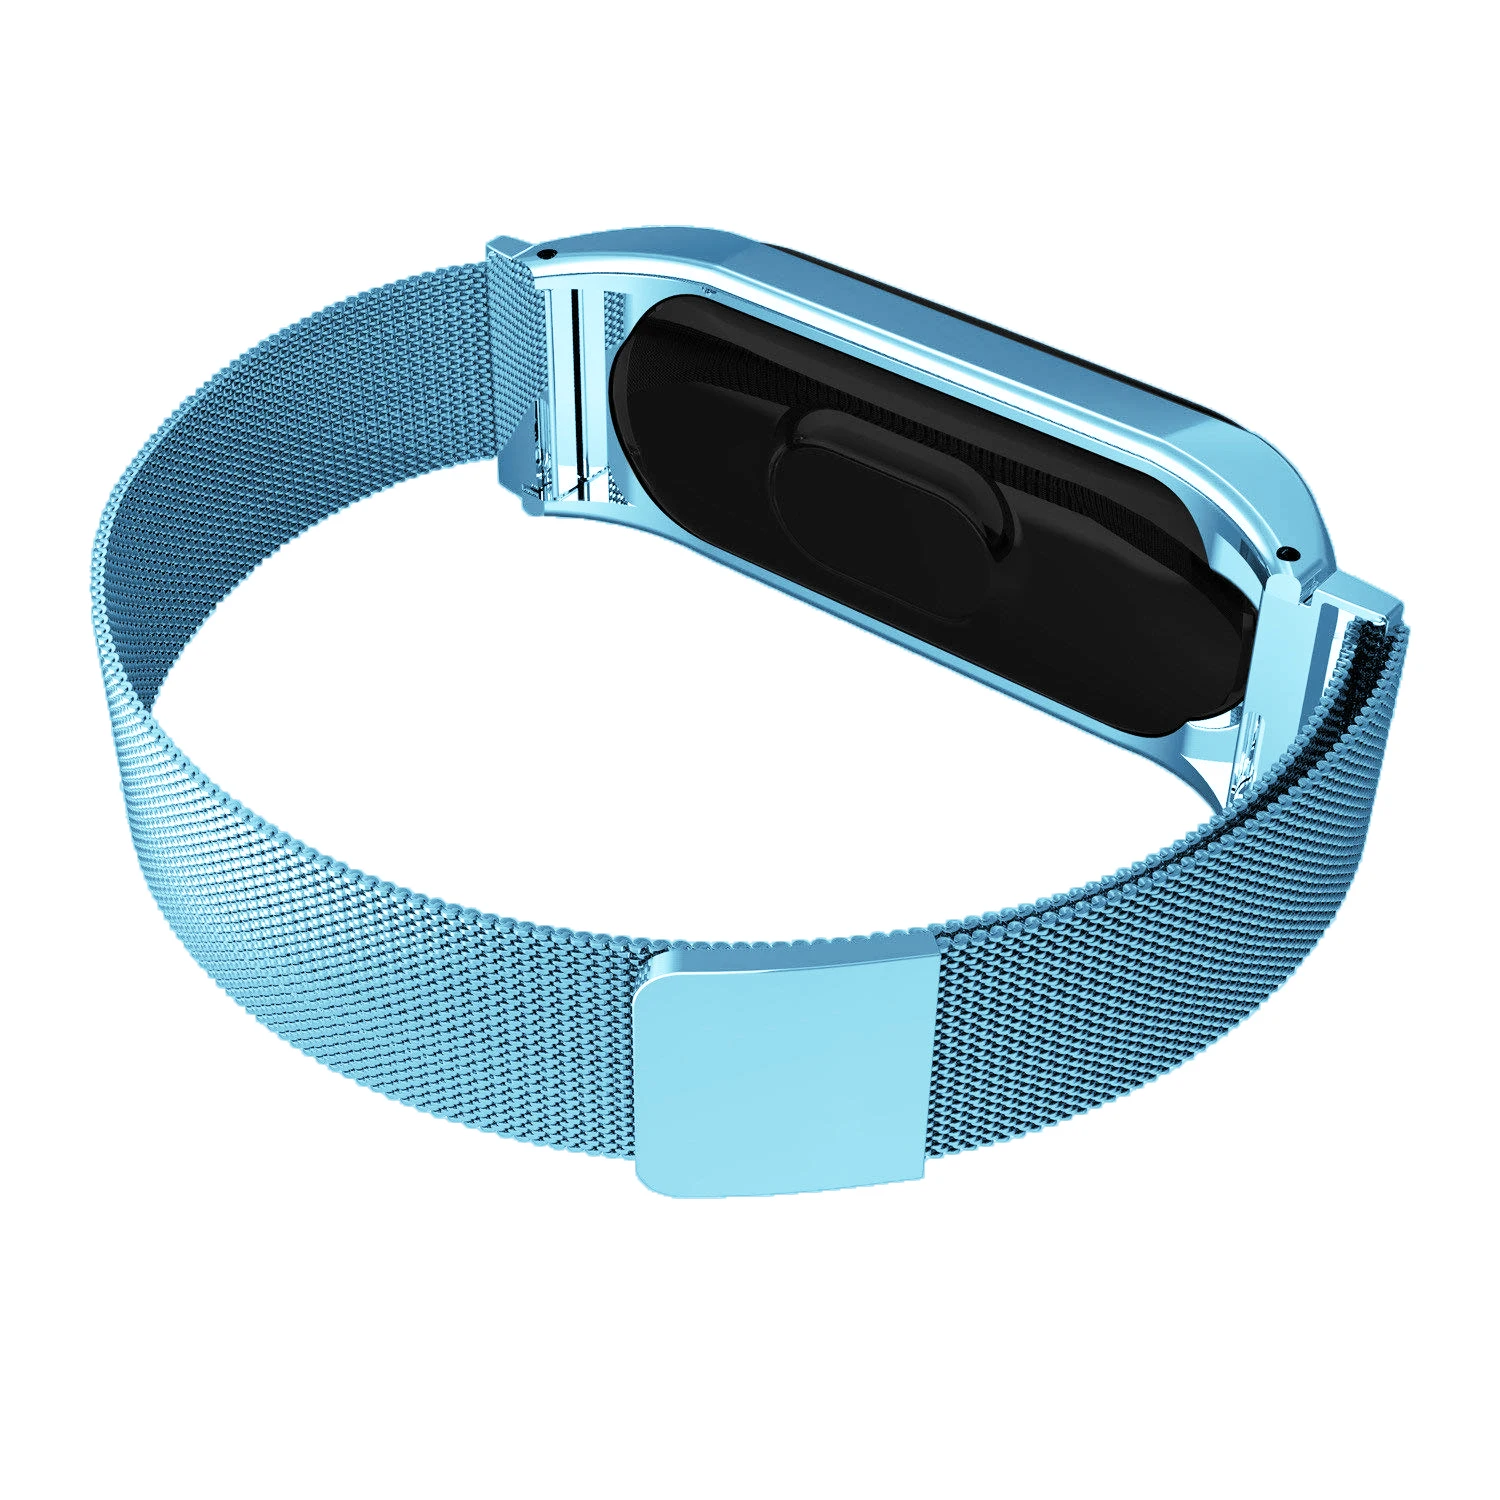 Wristband Metal Stainless Steel Strap For Xiaomi Mi Band 3 4 Wrist Watch Strap For Xiaomi Miband 3 4 Bracelet For Mi Band 3